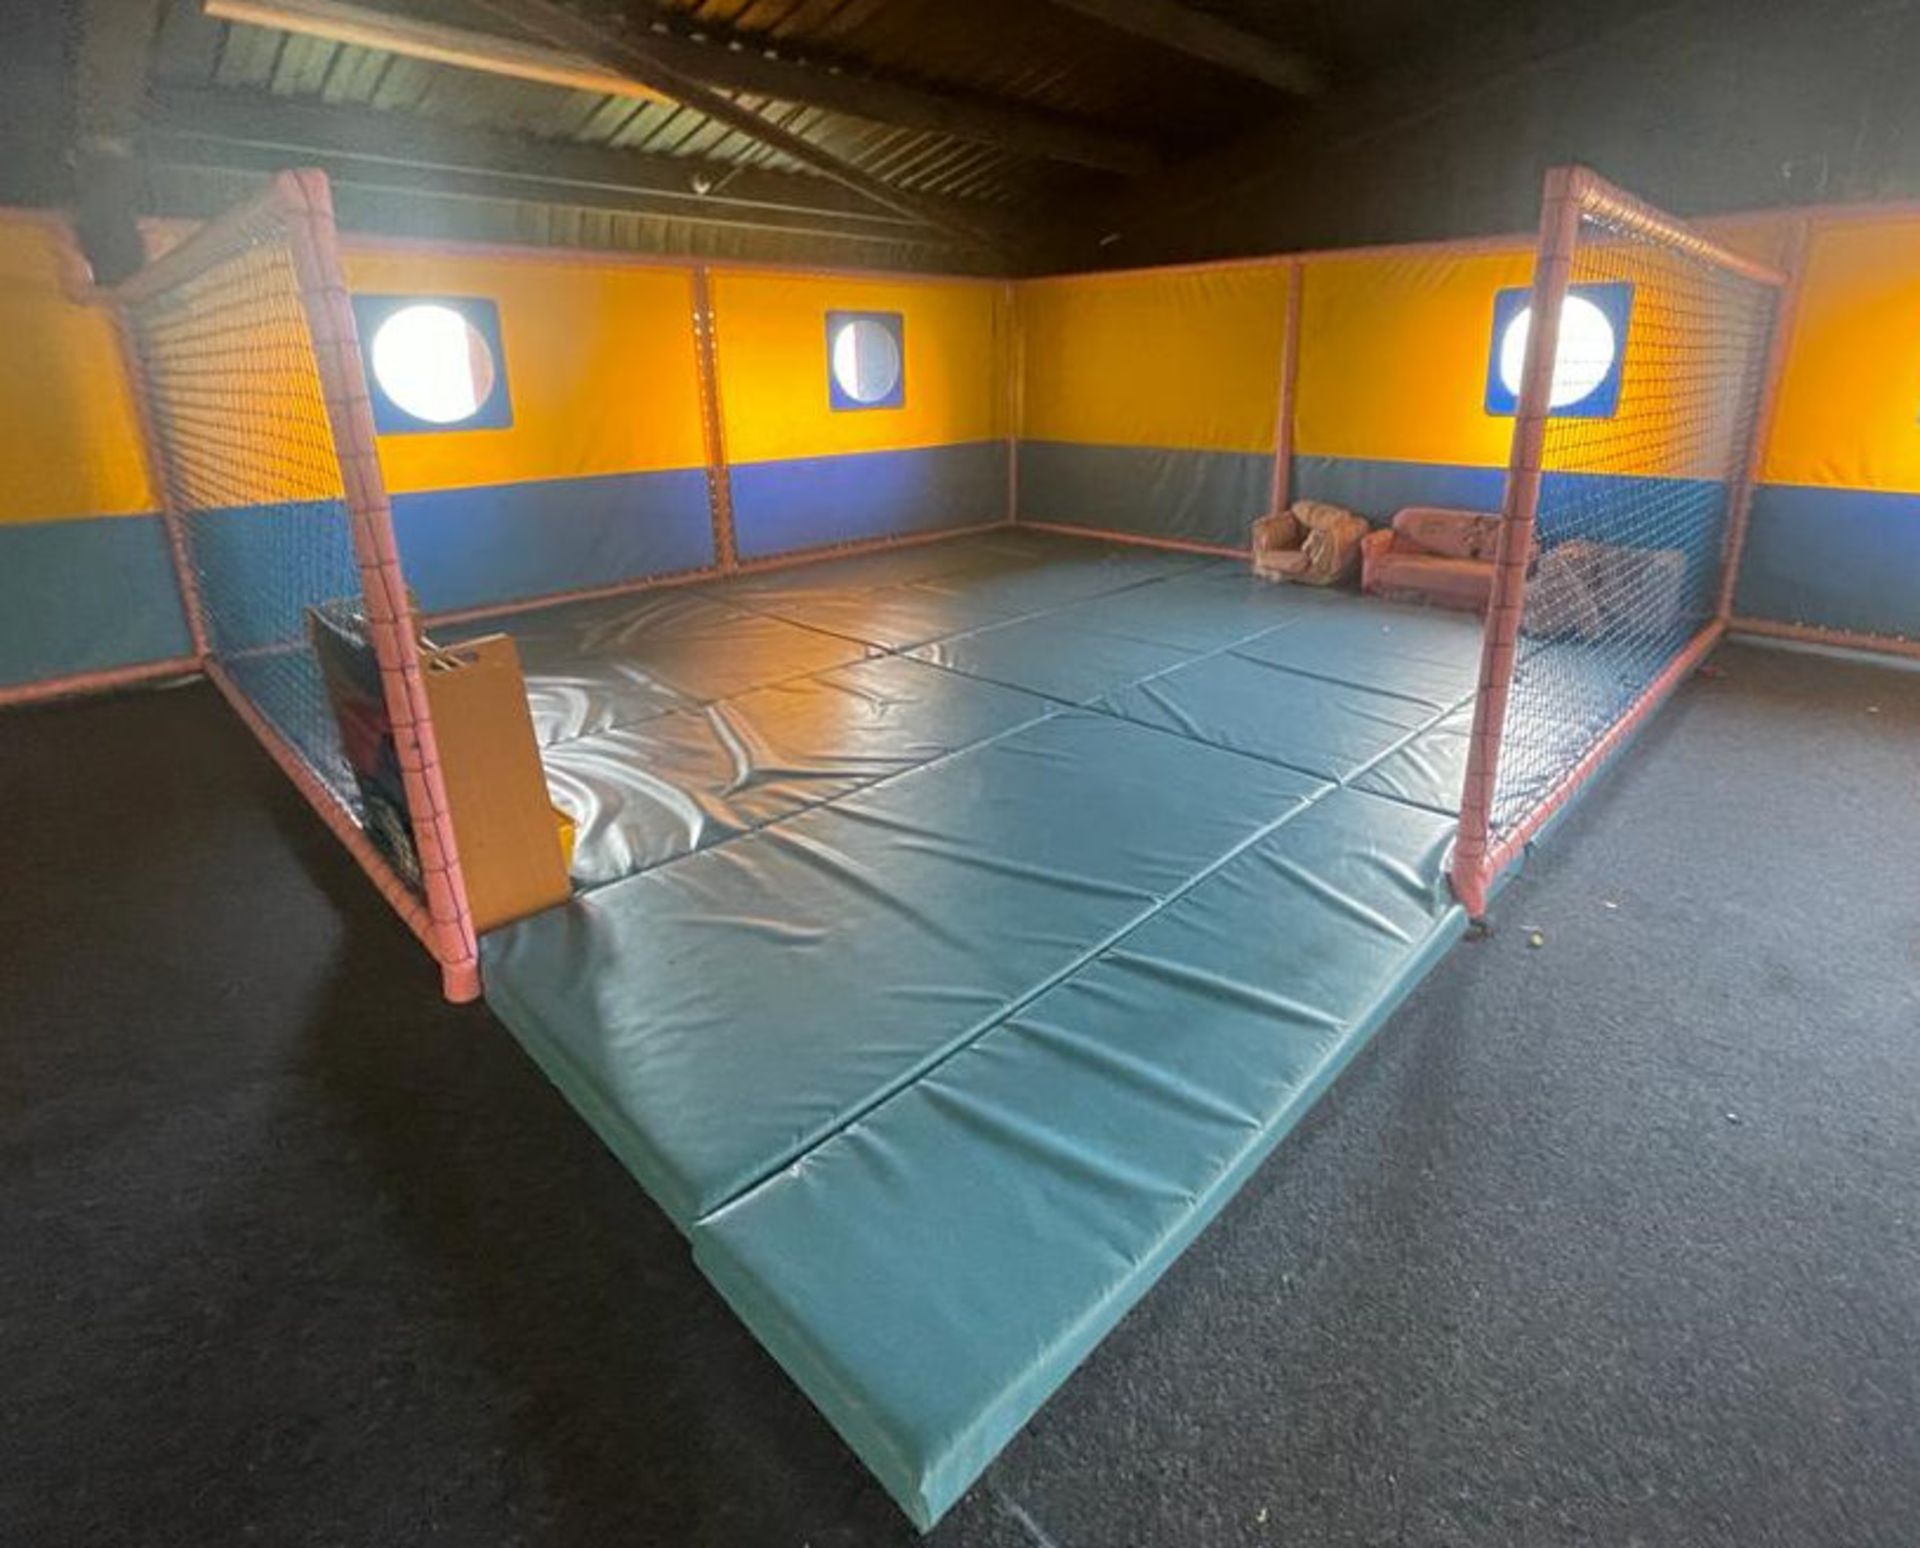 1 x Trampoline Park With Over 40 Interconnected Trampolines, Inflatable Activity Area, Waiting - Image 3 of 99